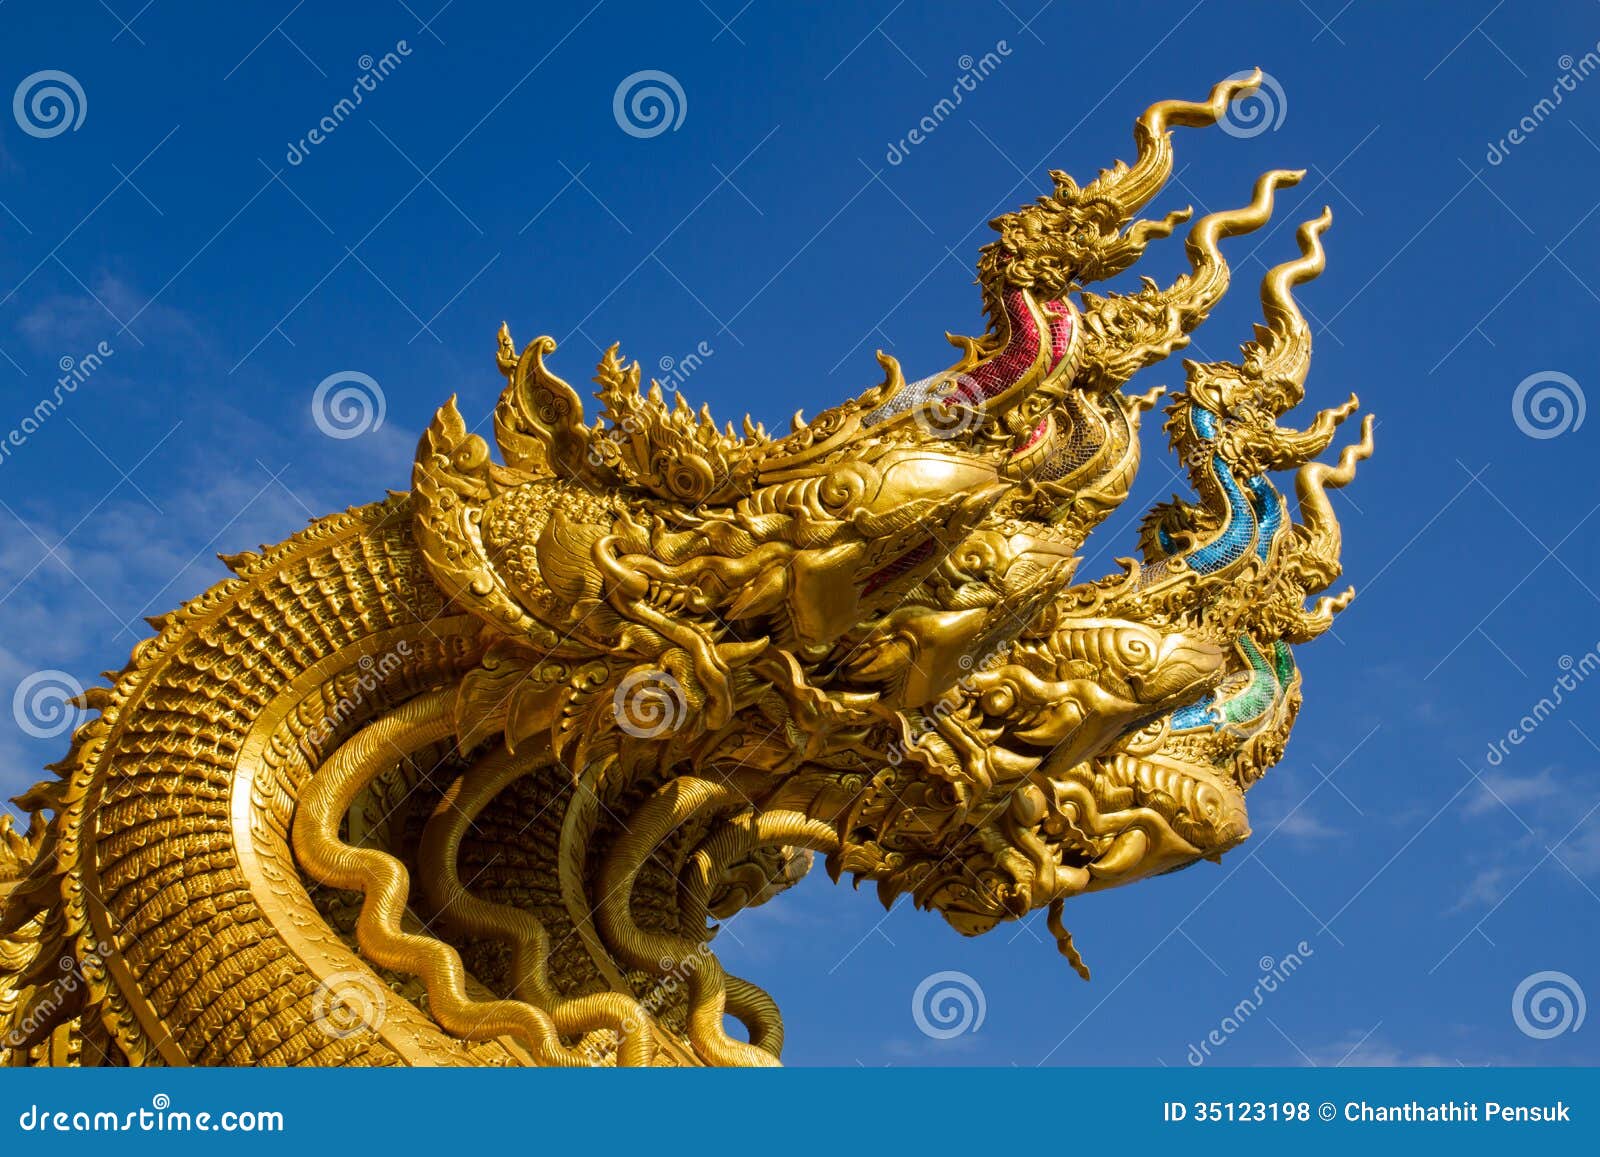 King of Nagas stock photo Image of building pattern 